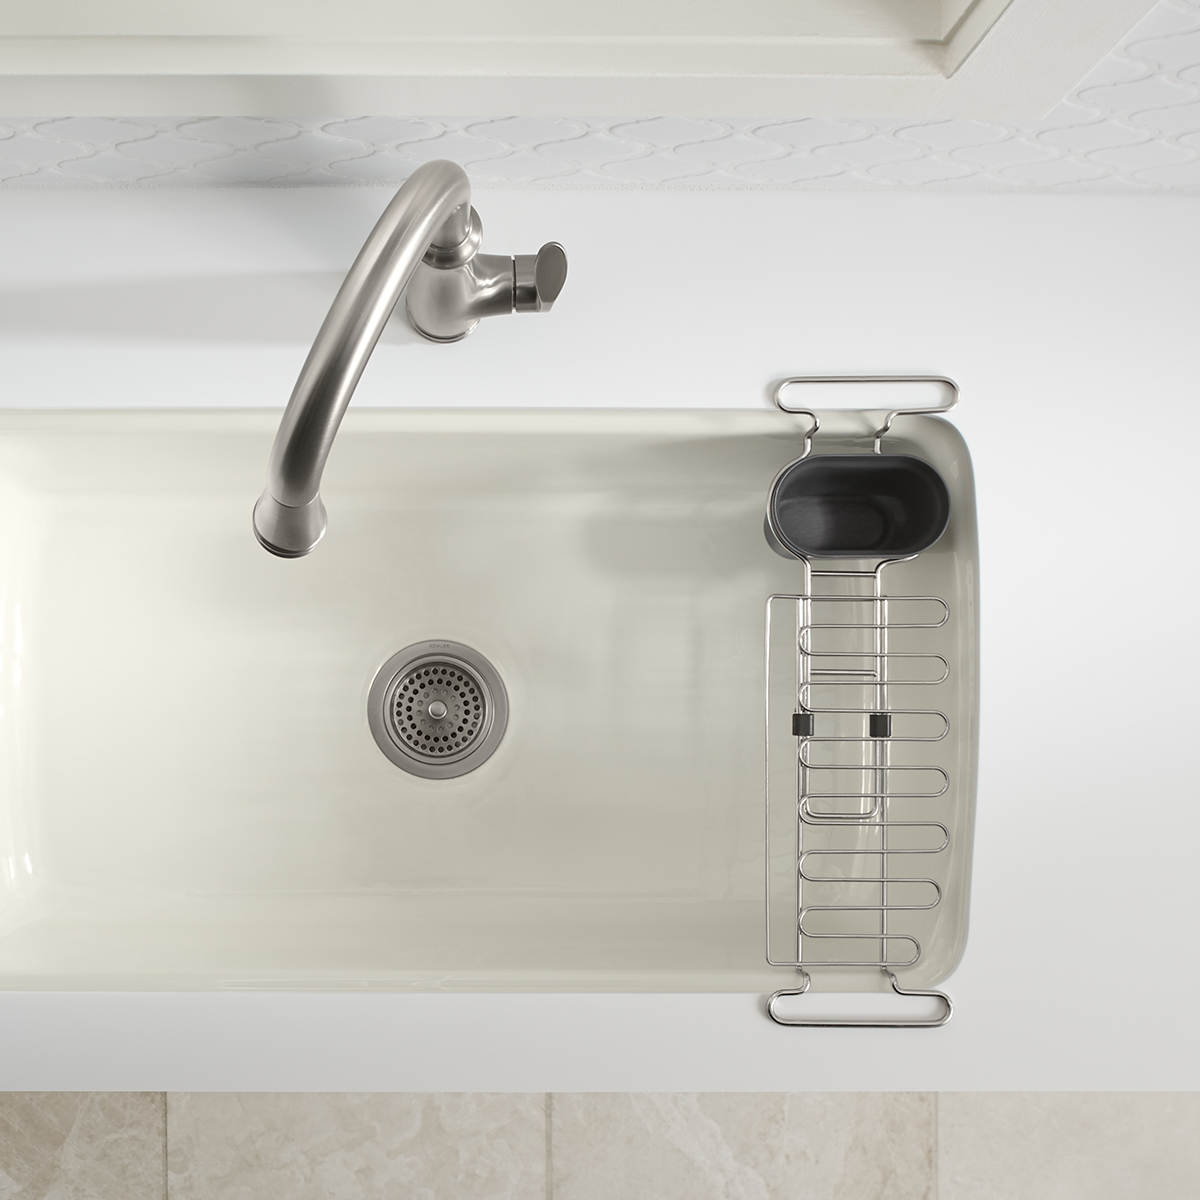 https://www.containerstore.com/catalogimages/306497/10071200-Kohler-Chrome-Sink-Utility-.jpg